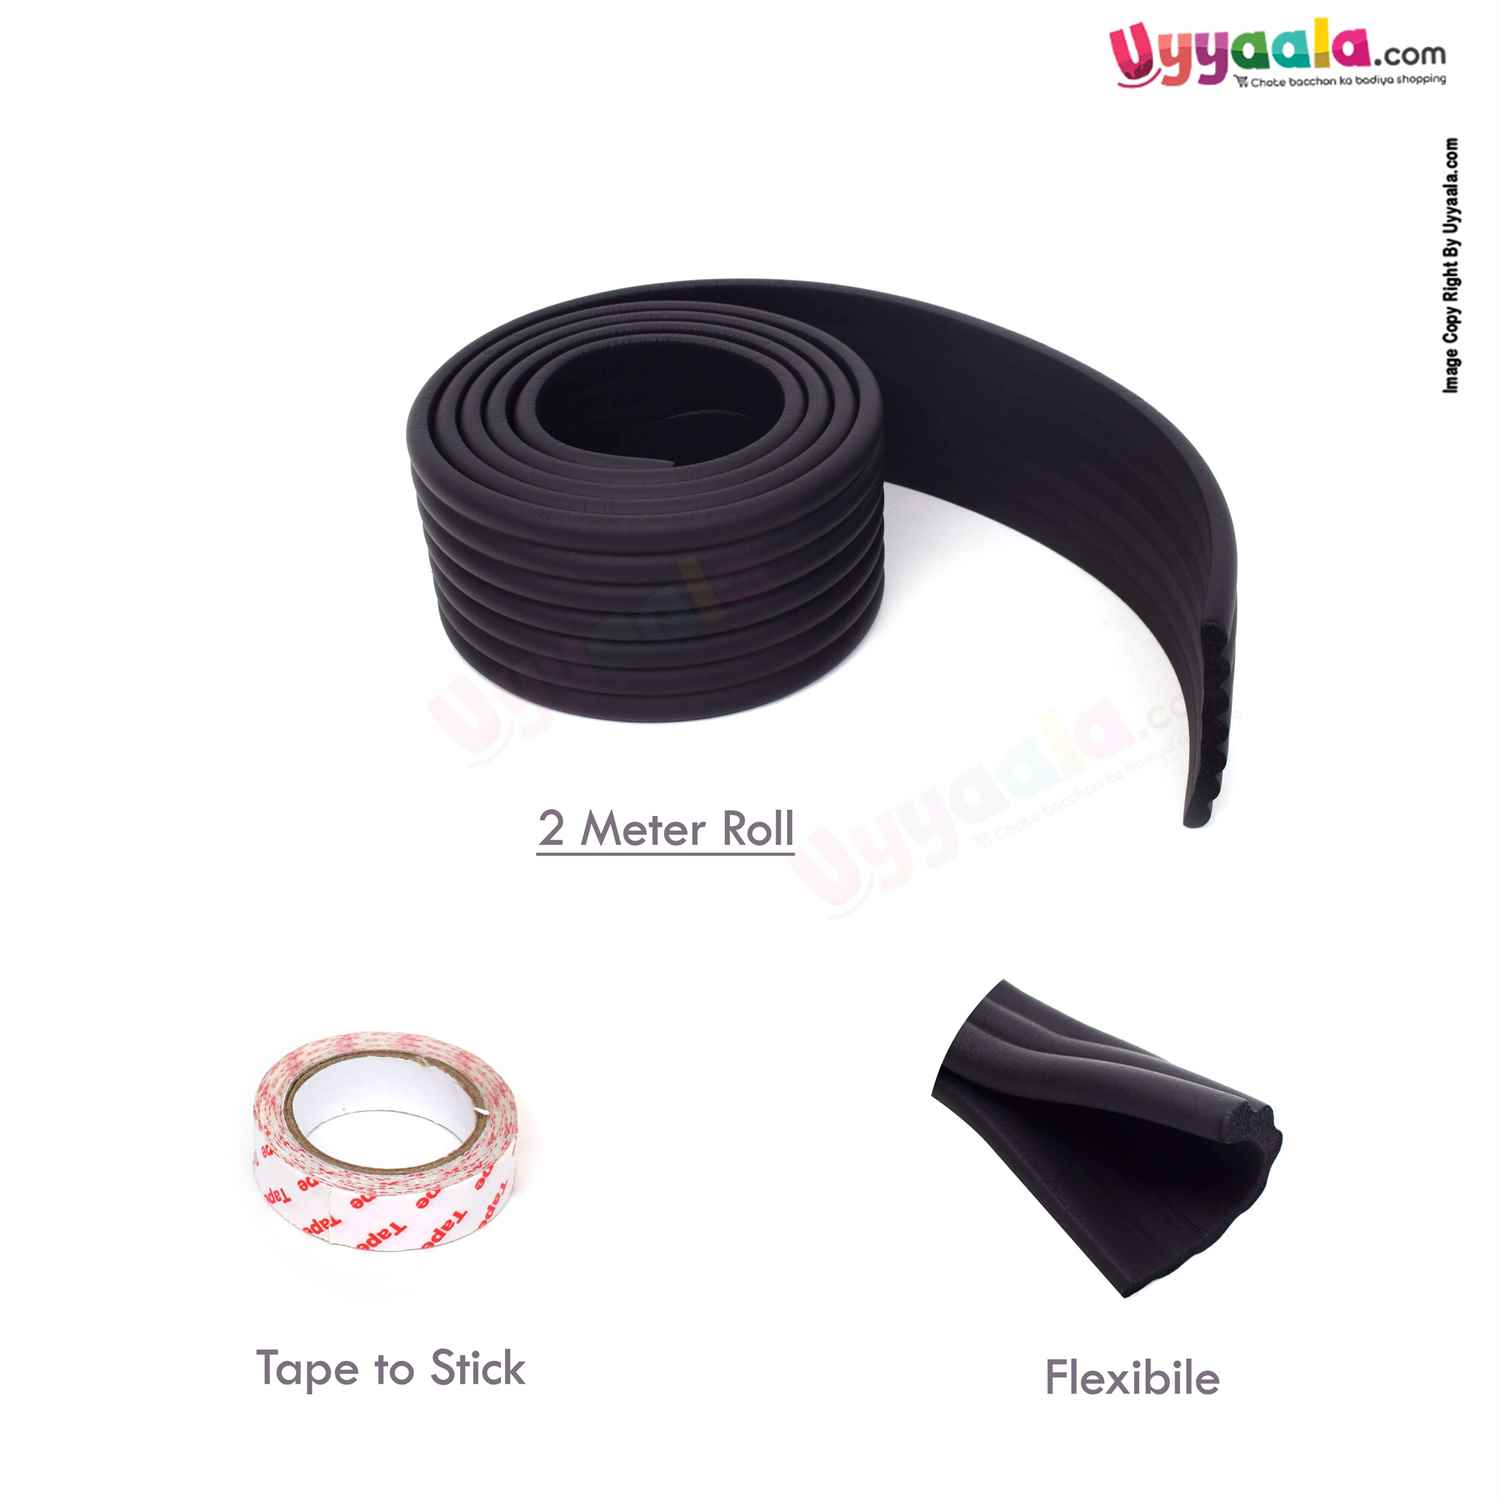 WEIKANG Safety Edge Guard for Babies 2 Meters 0+m Age, Black